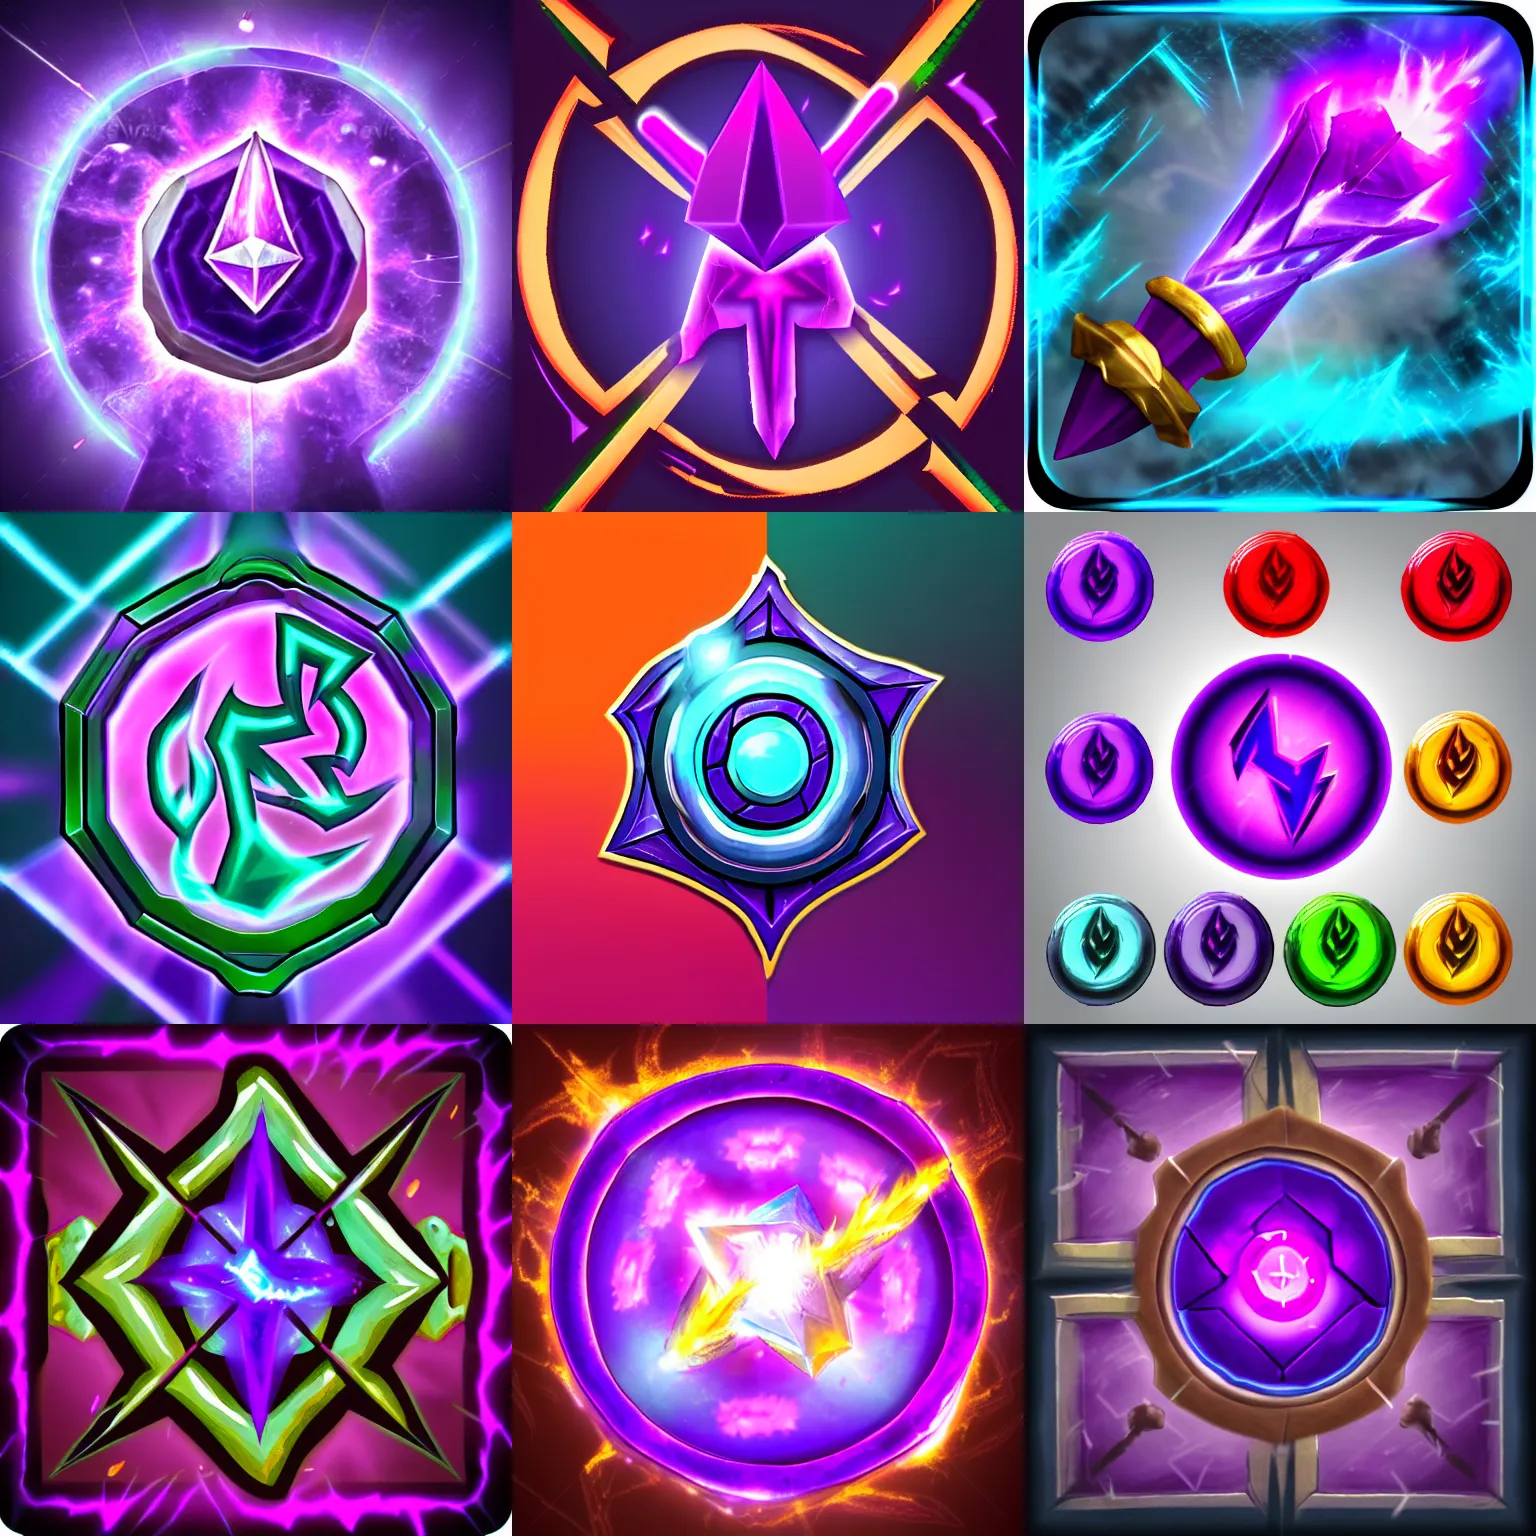 Prompt: a magic spell icon from rpg game, purple blizzard power, creating bolt, intensive colors, league of legends style, ambient light background